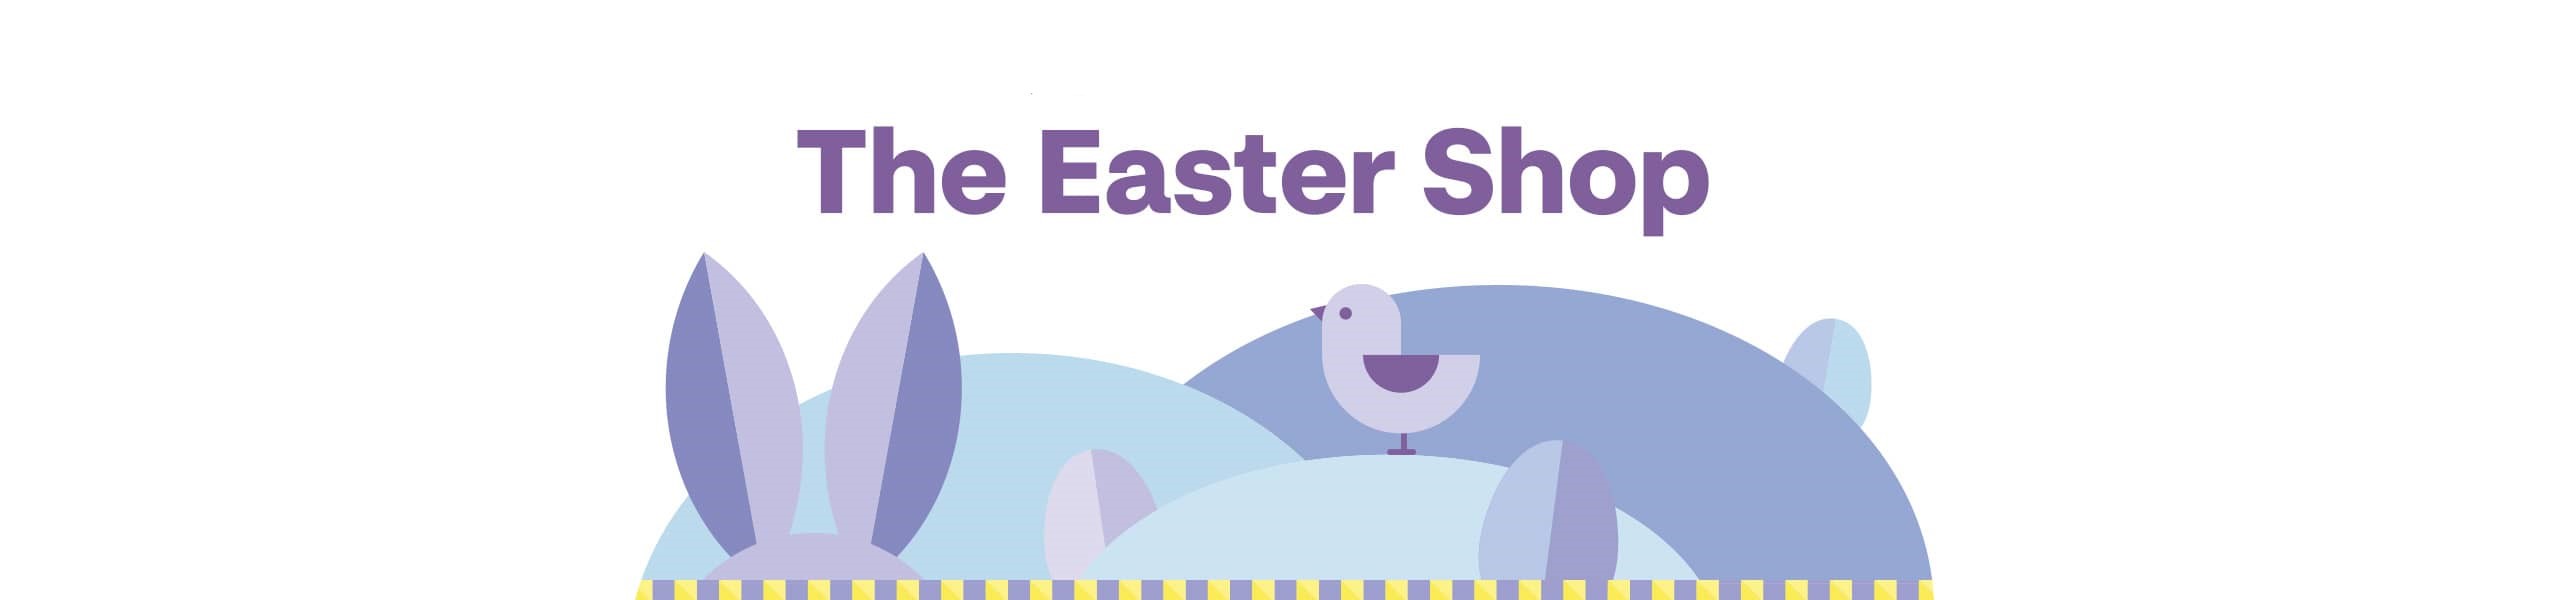 Easter is March 31. The Easter Shop. Bunny ears, Easter chick and eggs.